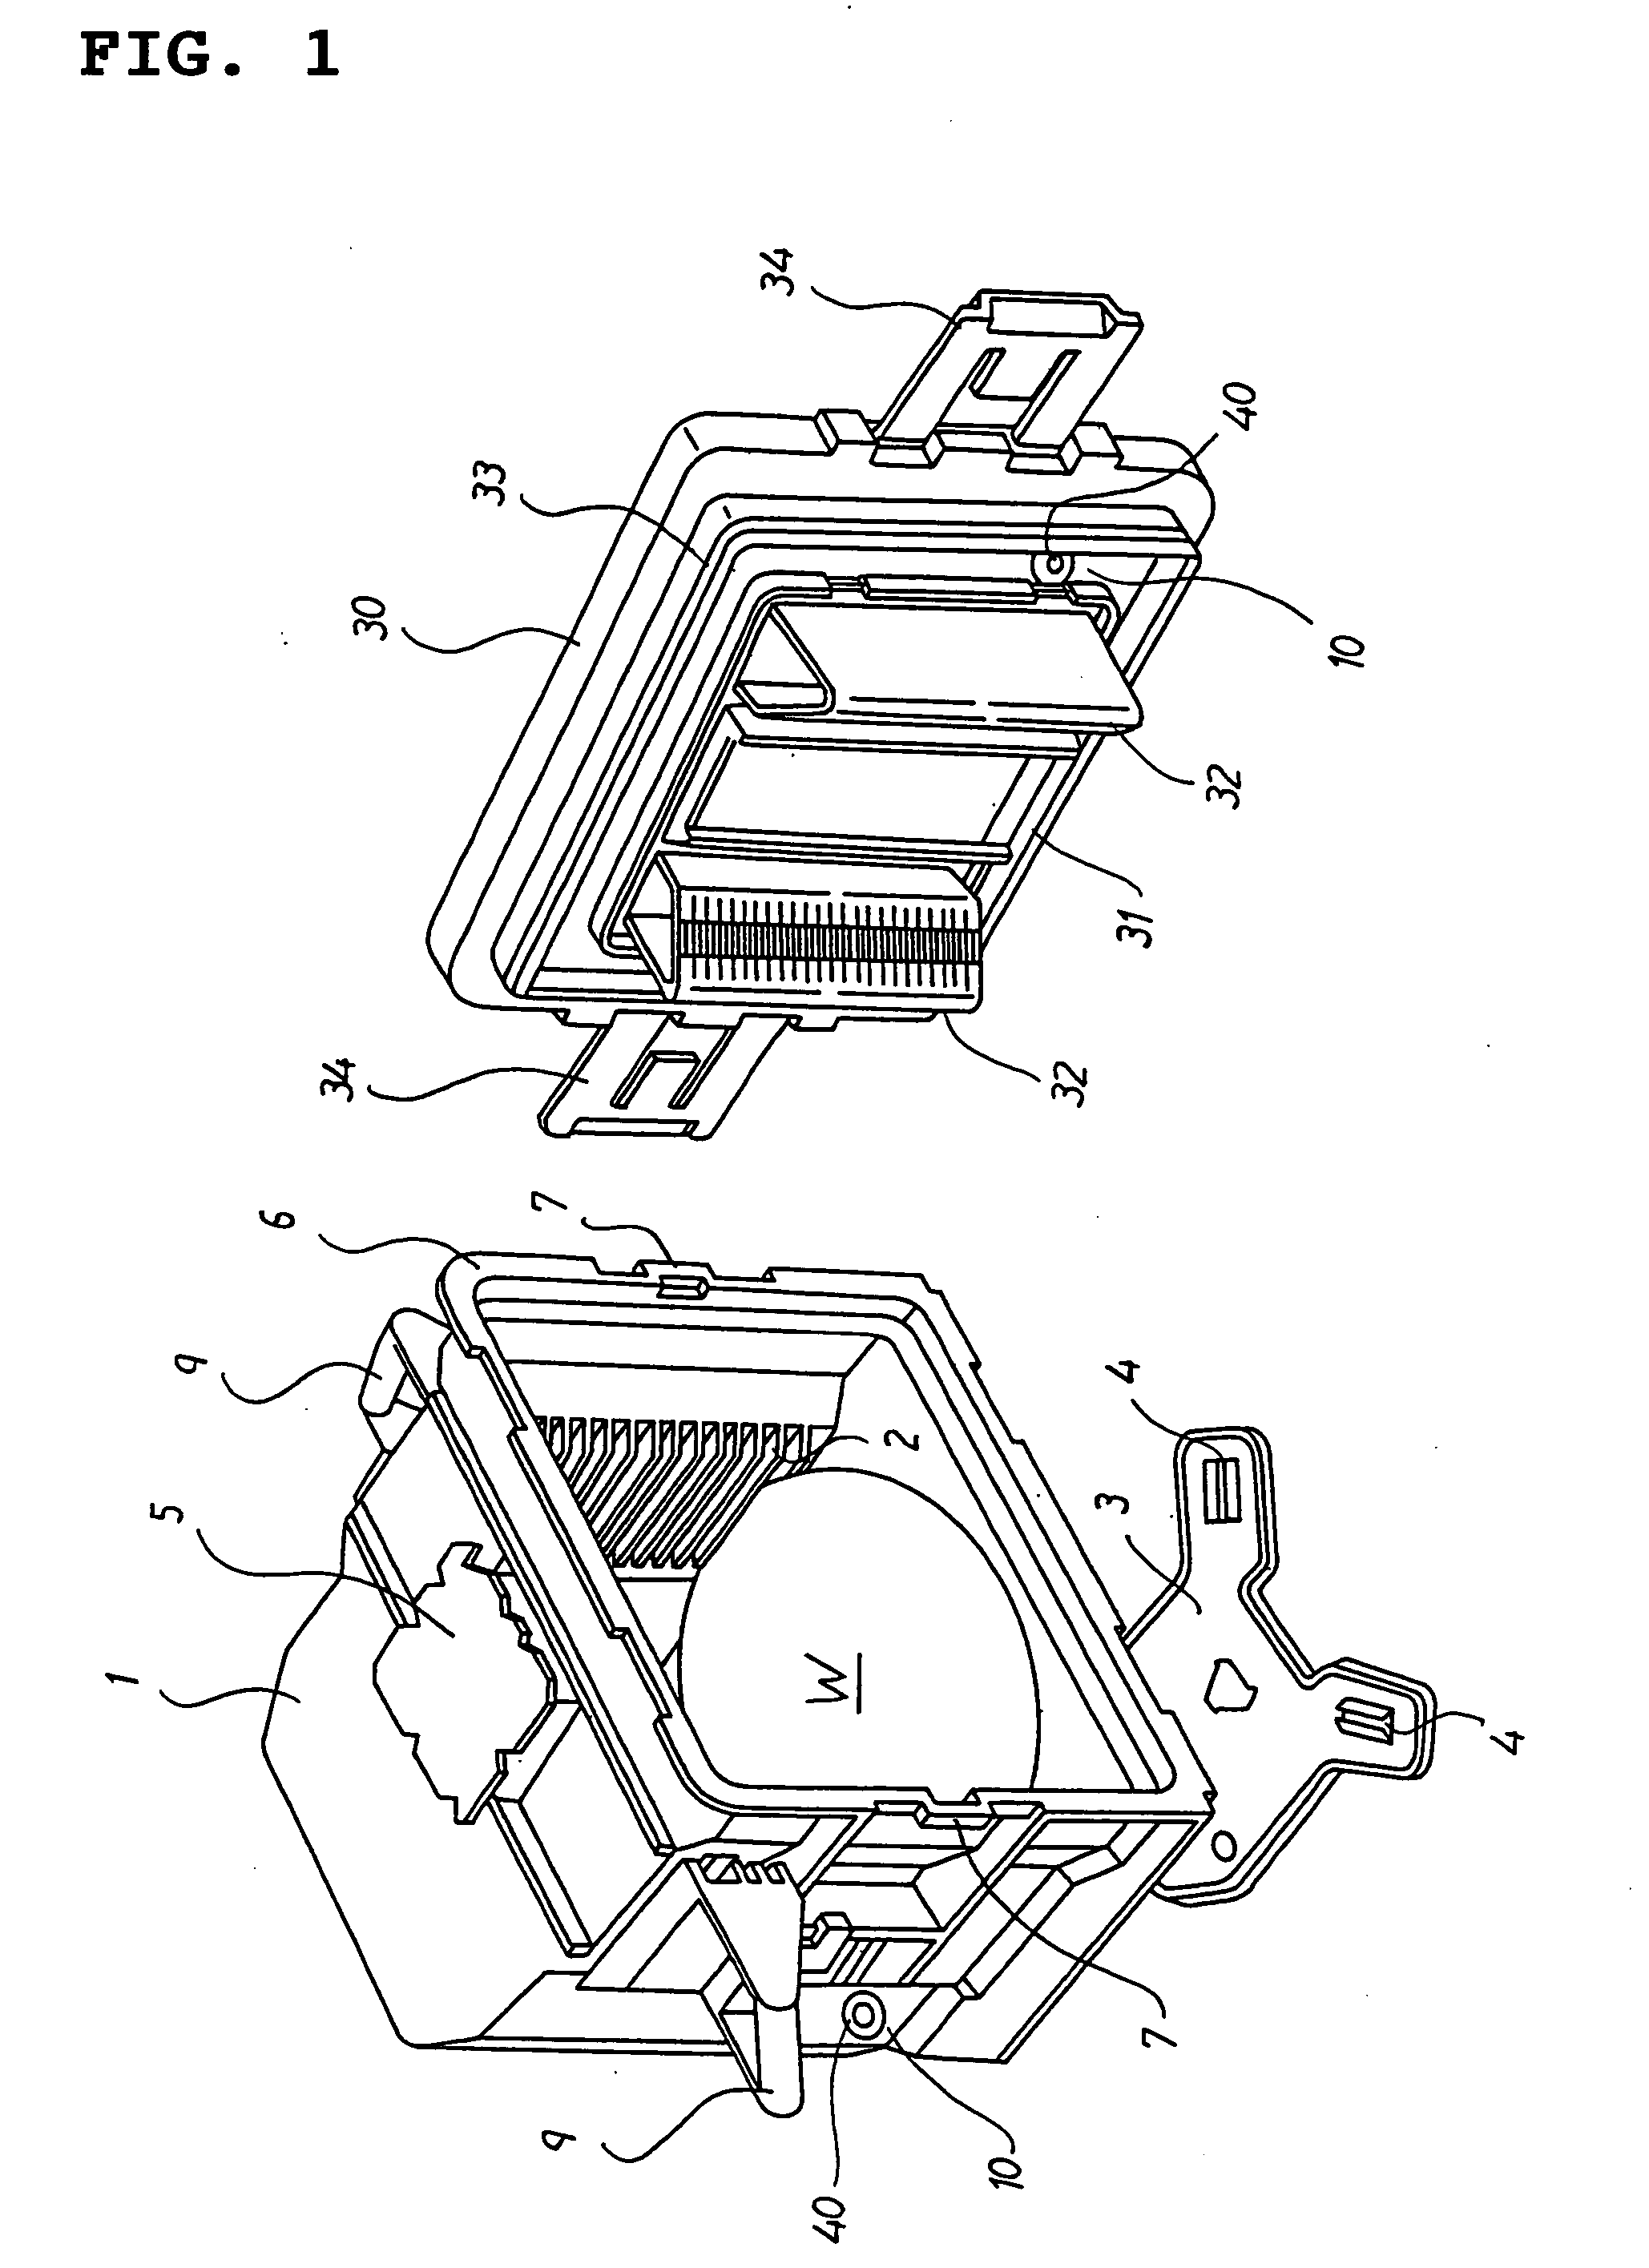 Substrate-storing container